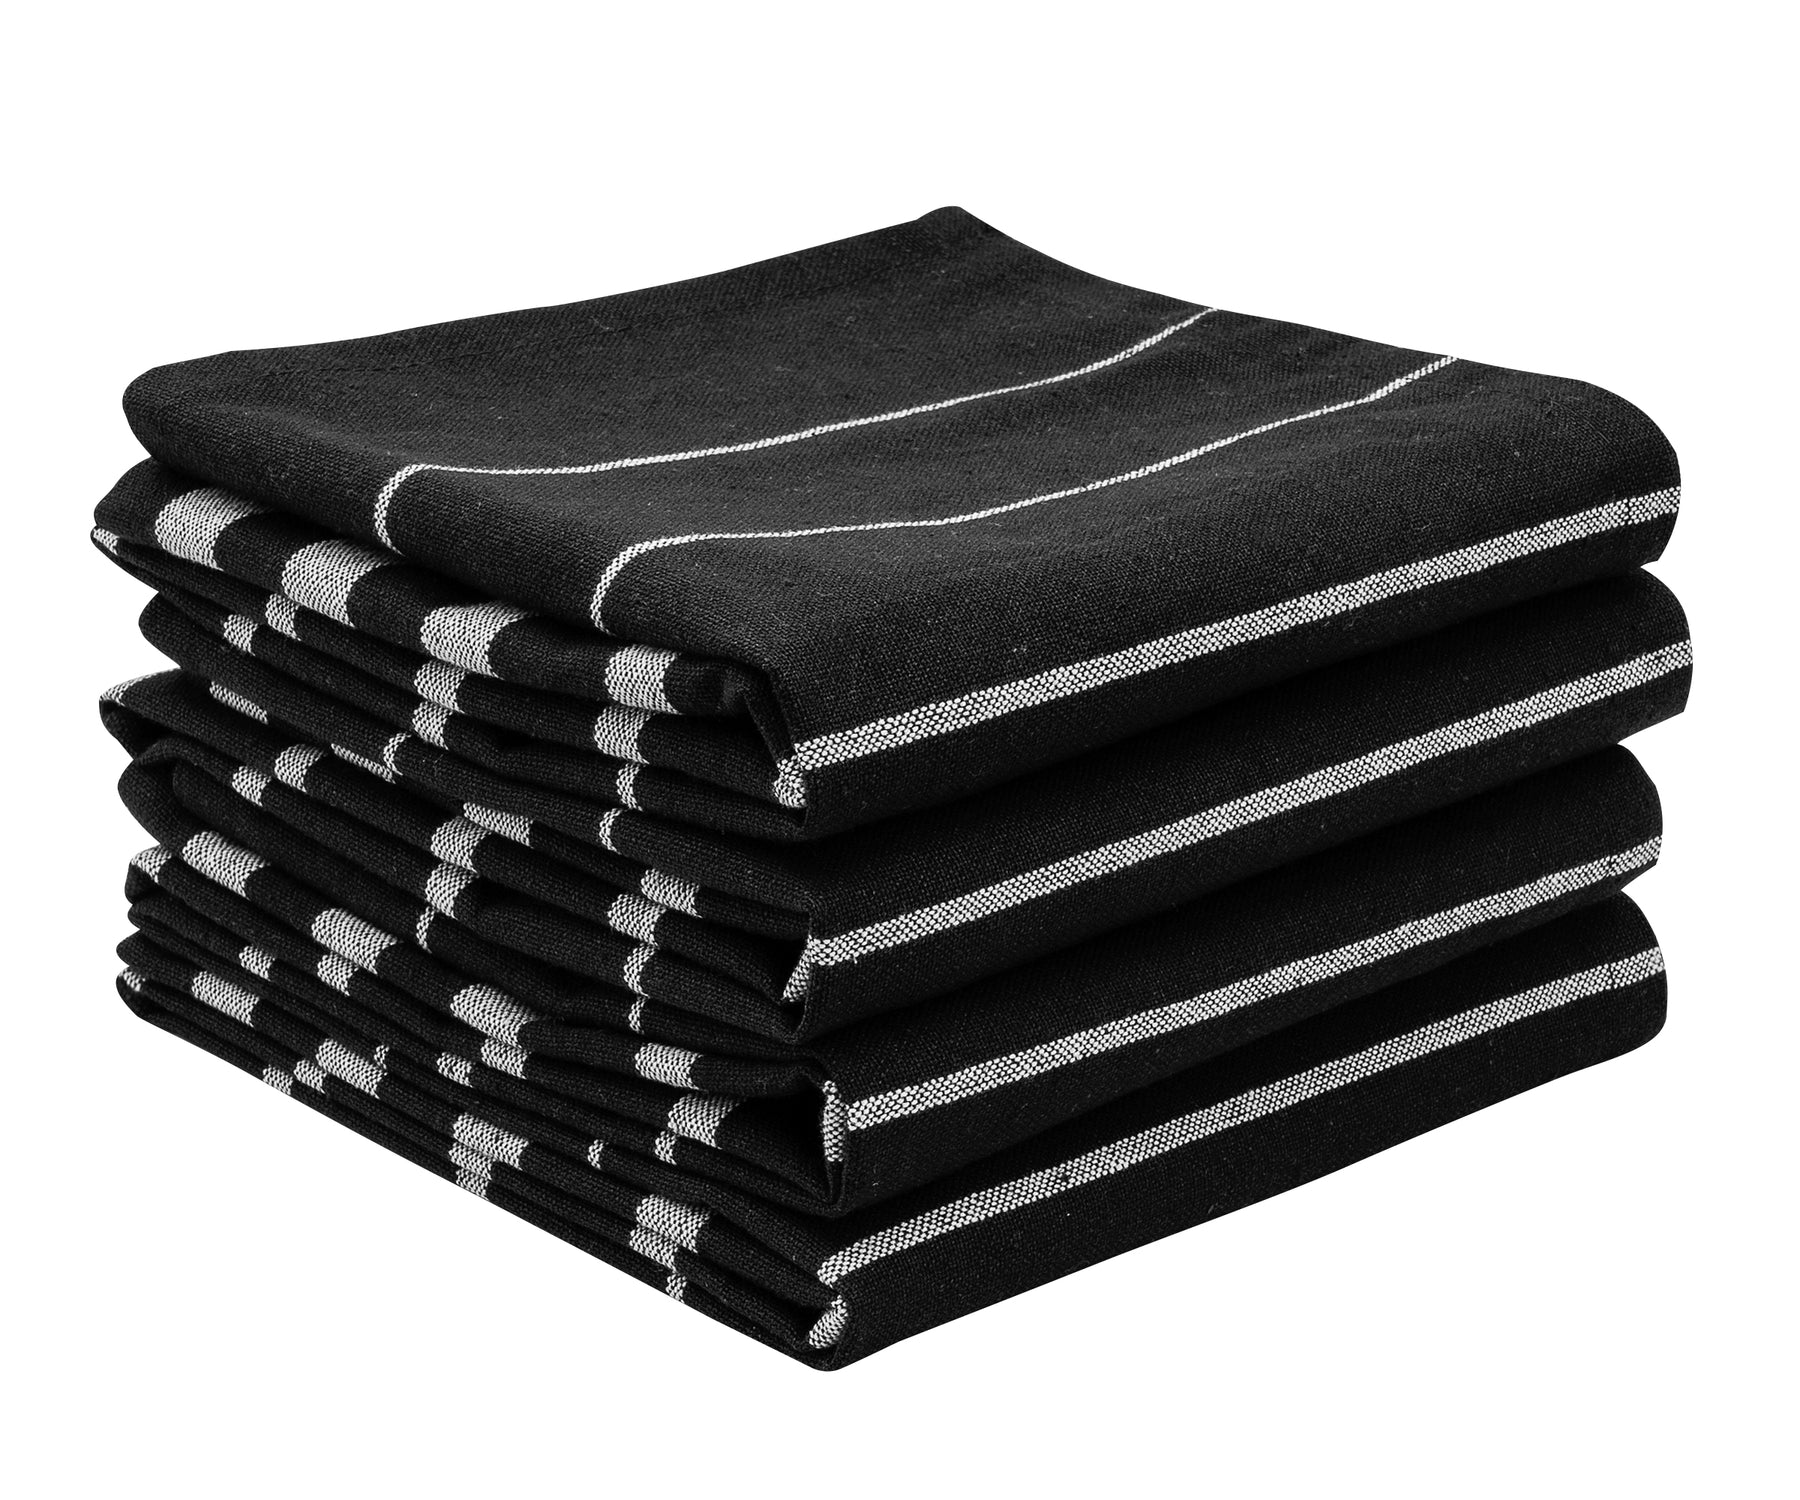 Fall Hand Towels, Christmas Tea Towels, Black Kitchen Towels Decorative, Cotton Dish Towels, Linen Kitchen Towels, Dish Towels Cotton, Linen Tea Towels, Decorative Kitchen Towels, Fall Dish Towels Black and White.Neatly stacked black and white striped dish towels